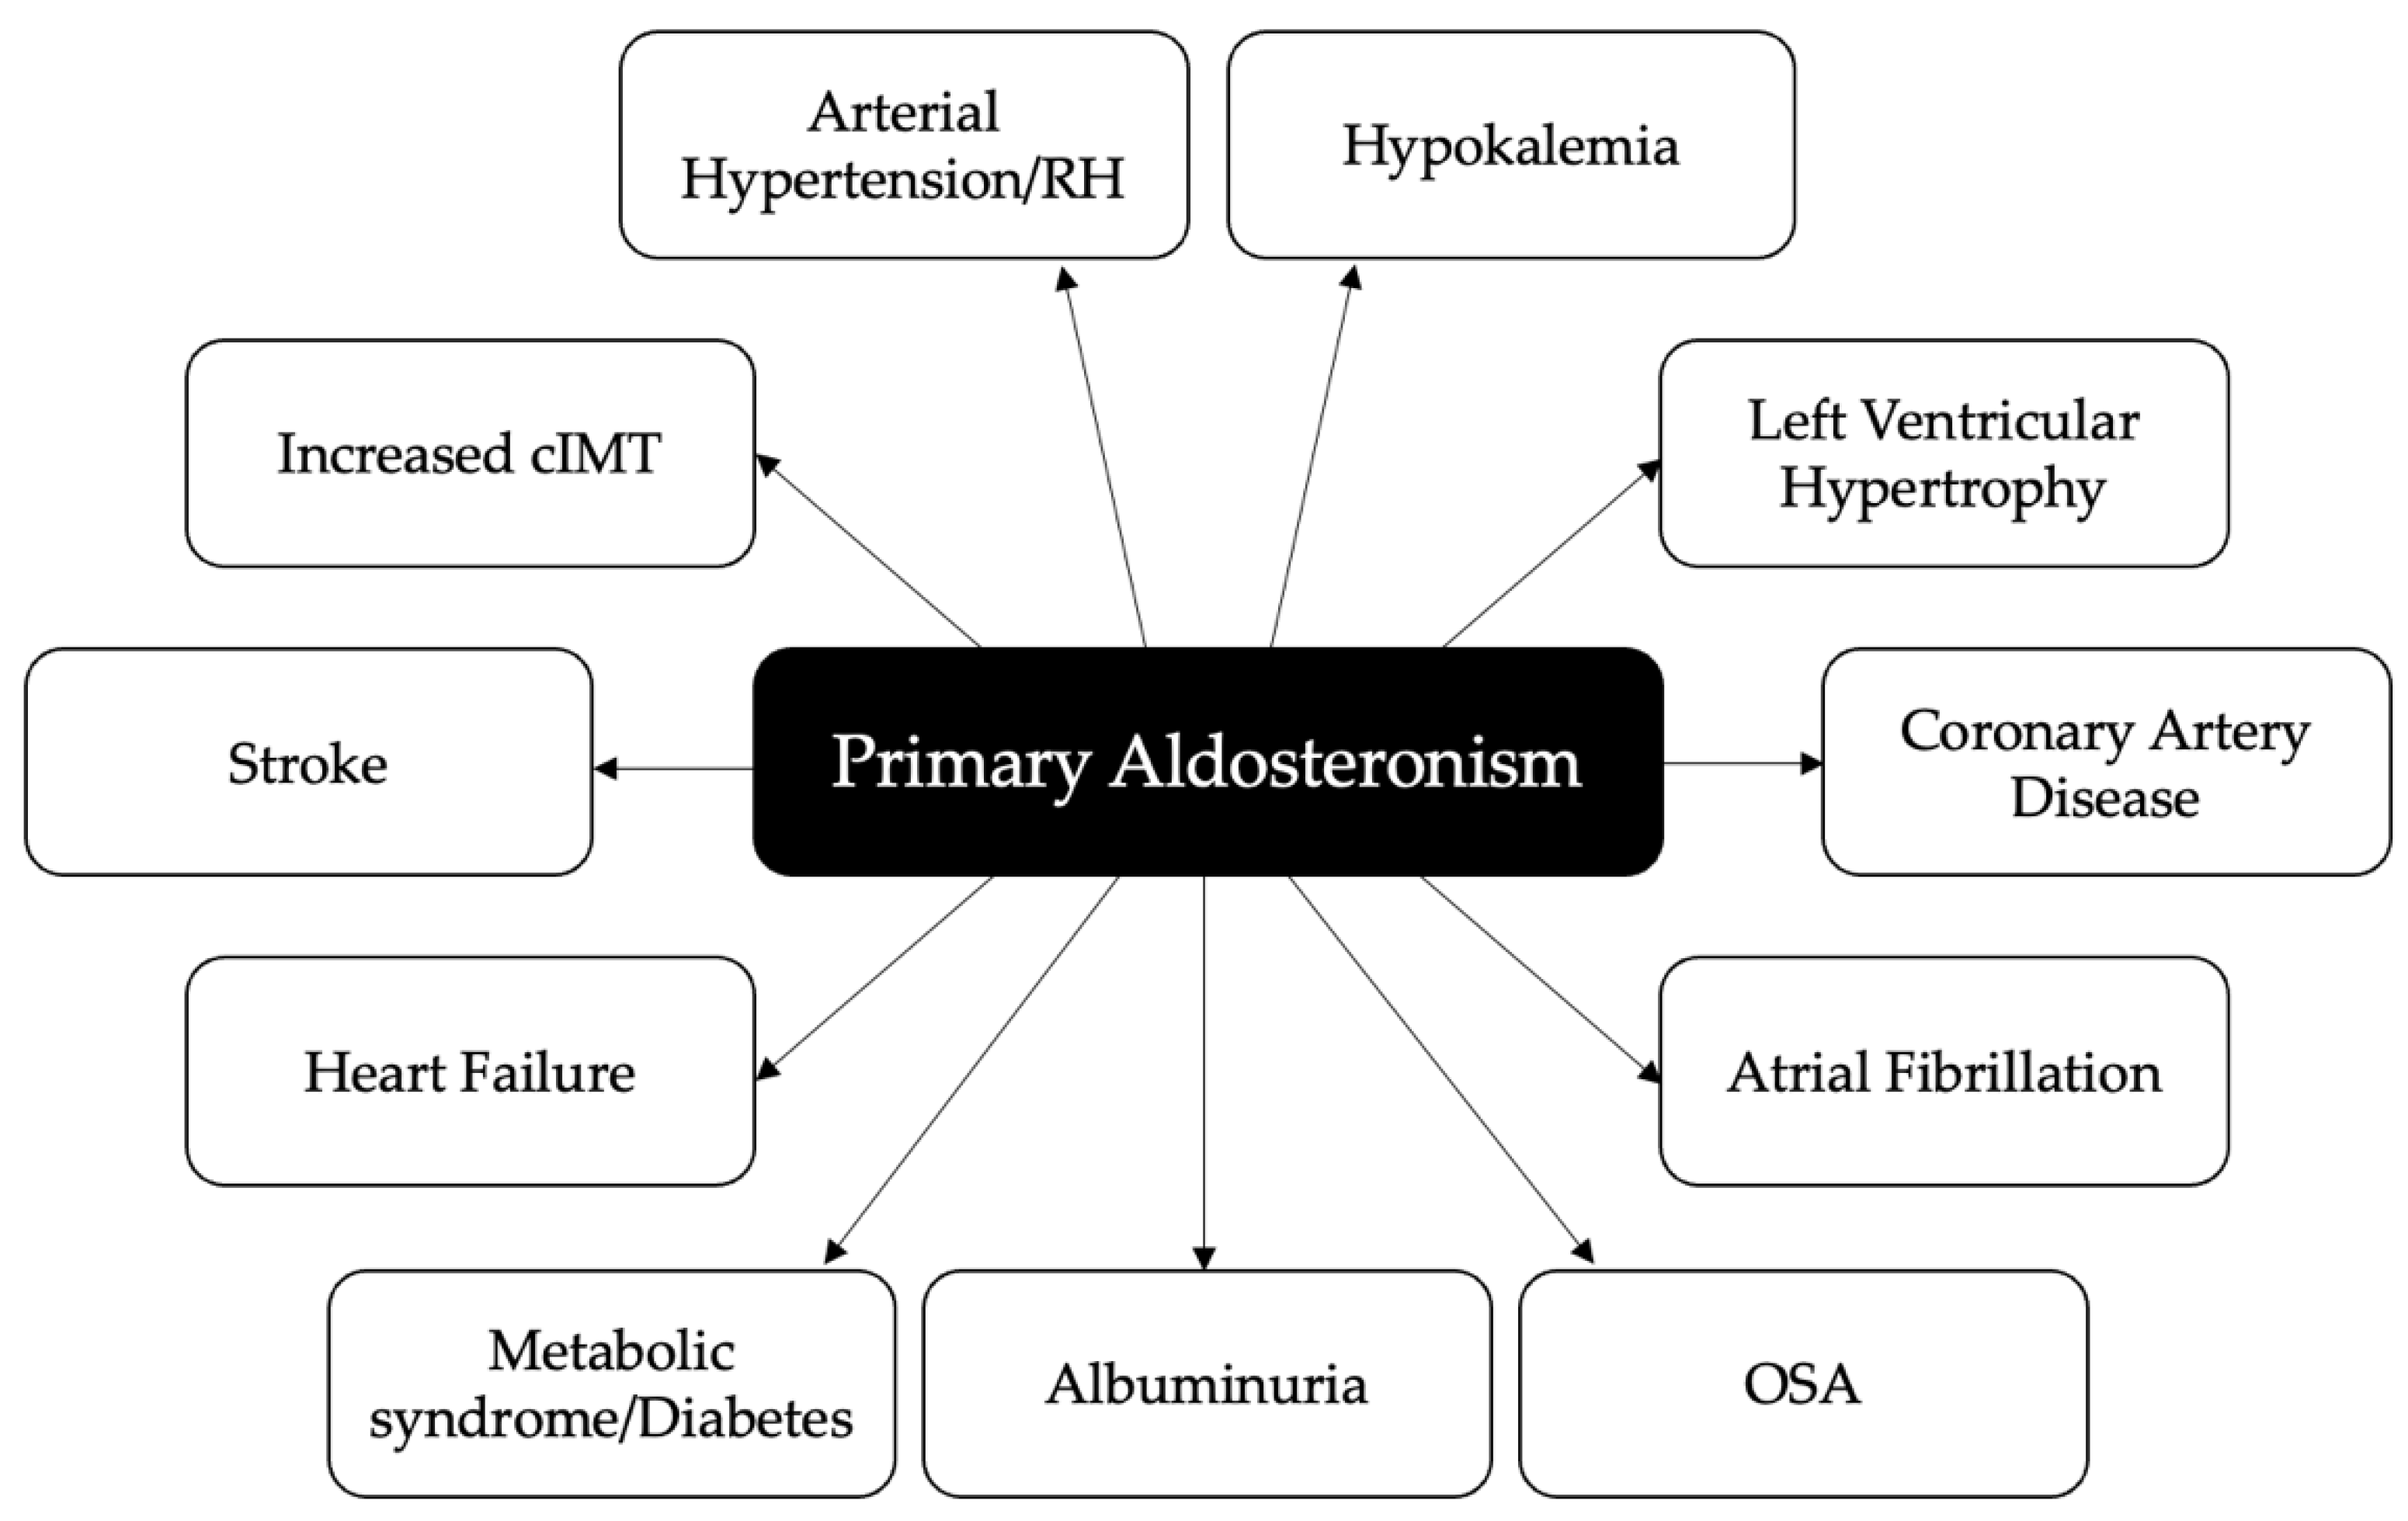 IJMS | Free Full-Text | Atrial Fibrillation and Aortic Ectasia as  Complications of Primary Aldosteronism: Focus on Pathophysiological Aspects